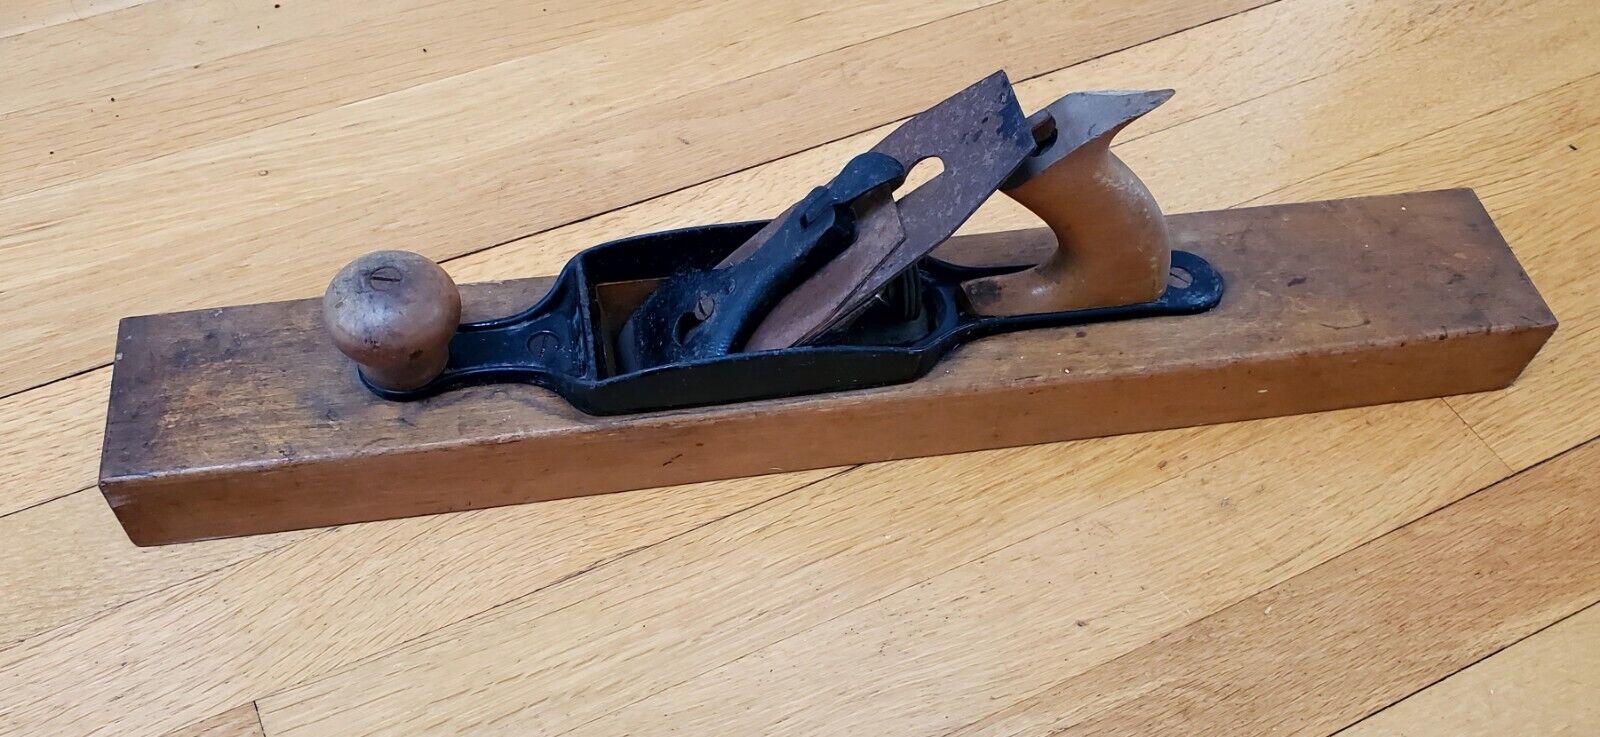 Vintage Stanley Bailey No. 30 Wood Transitional Plane